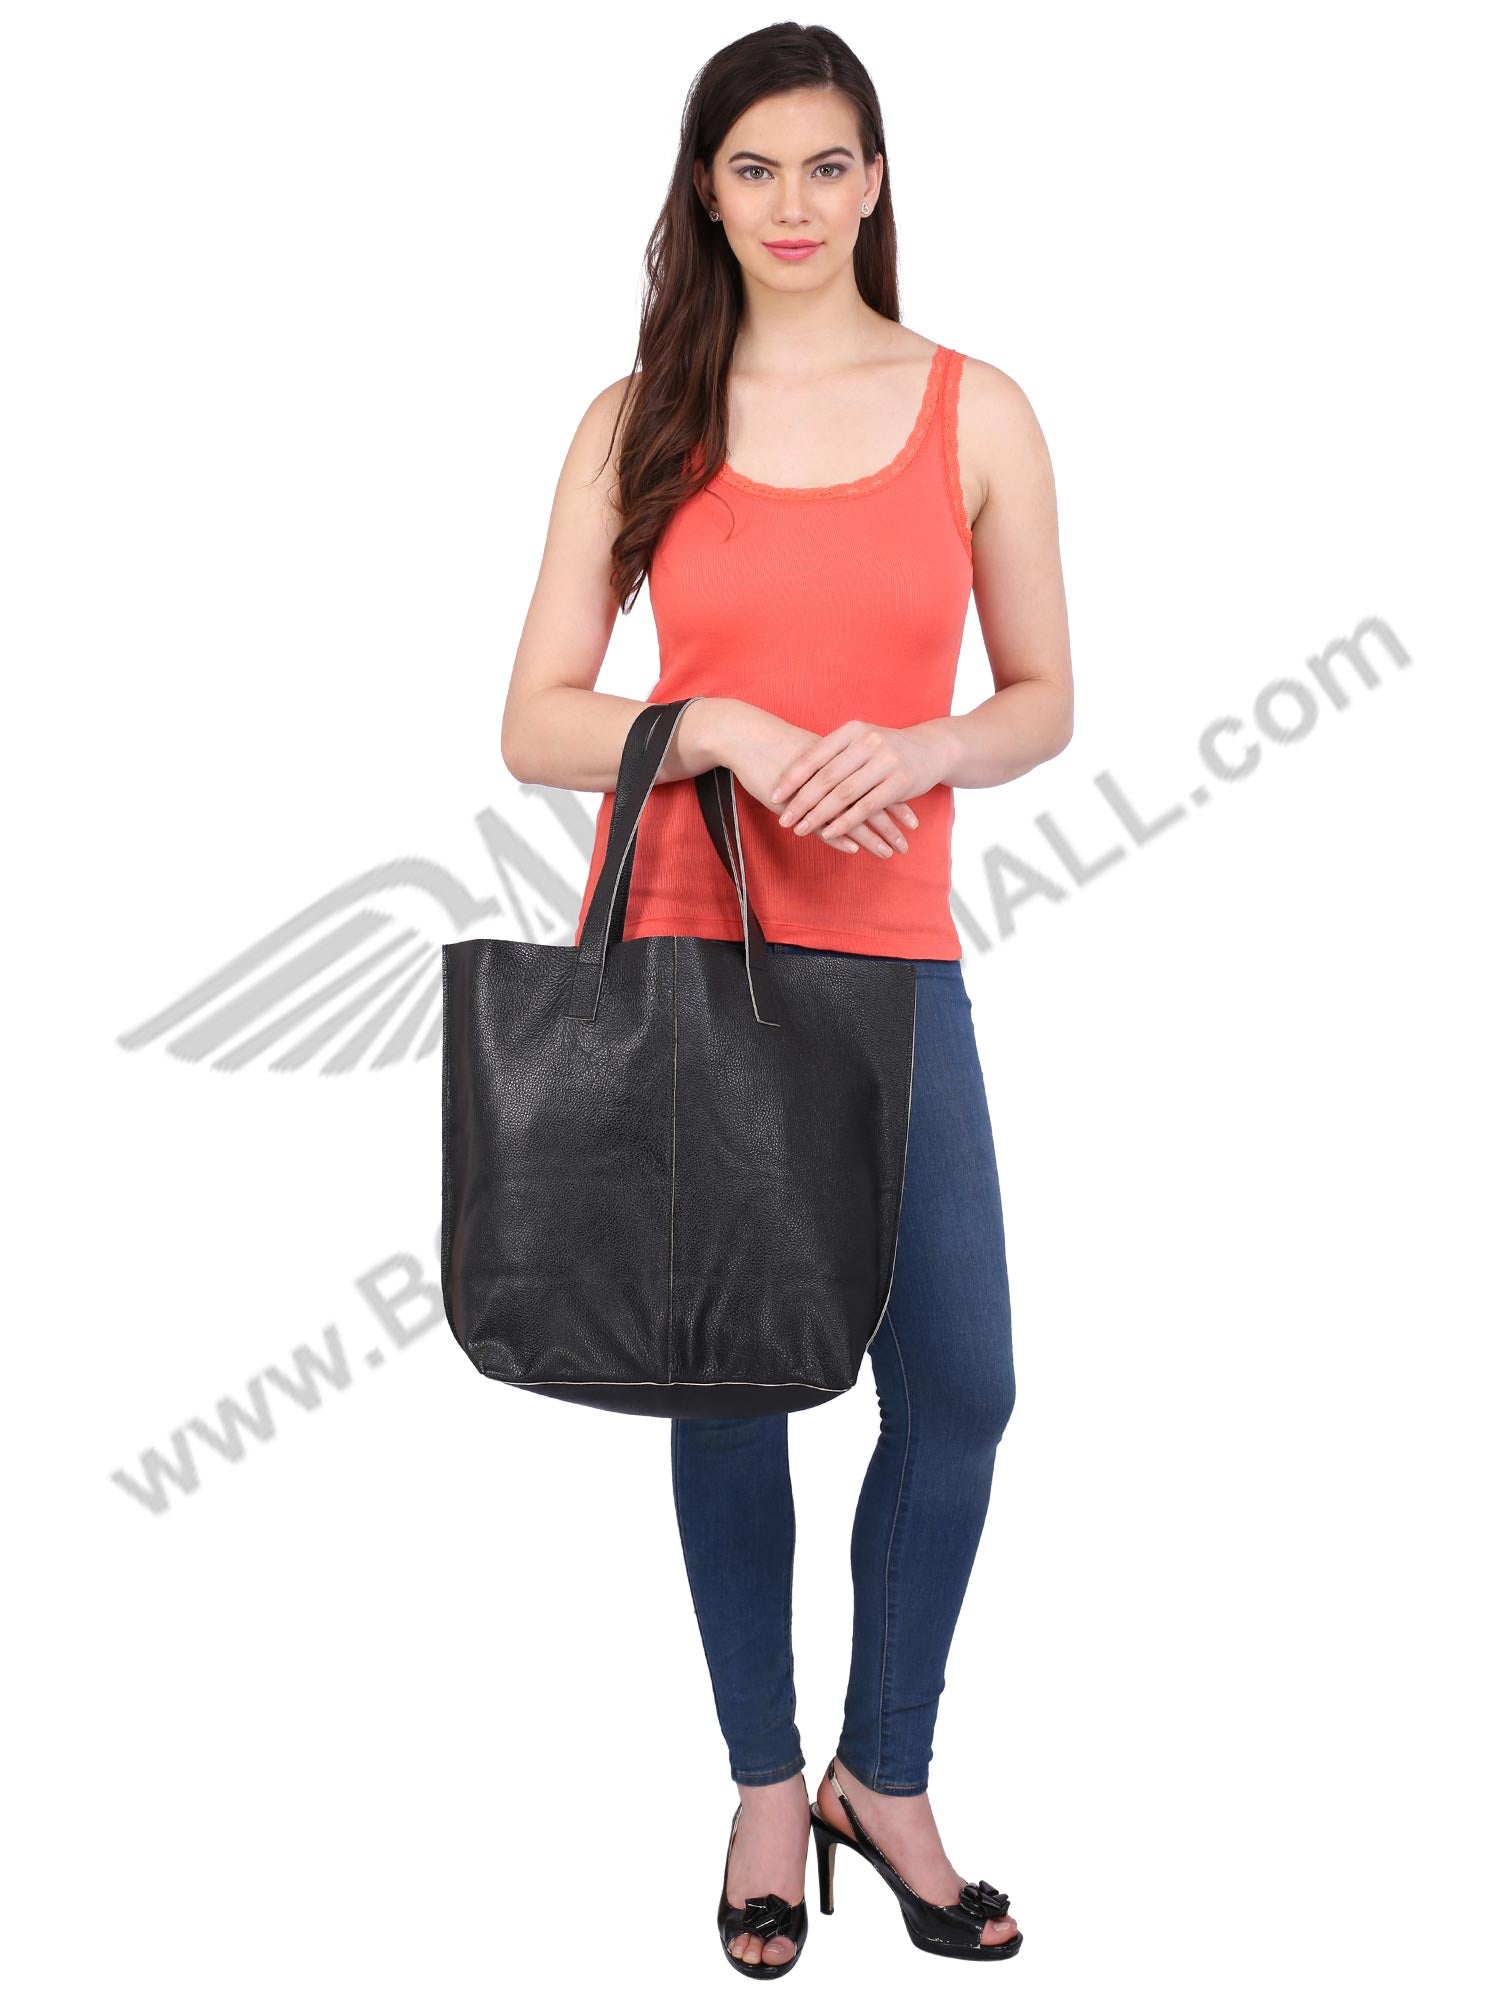 a model posing with  a black LUFT SHOPPING BAG